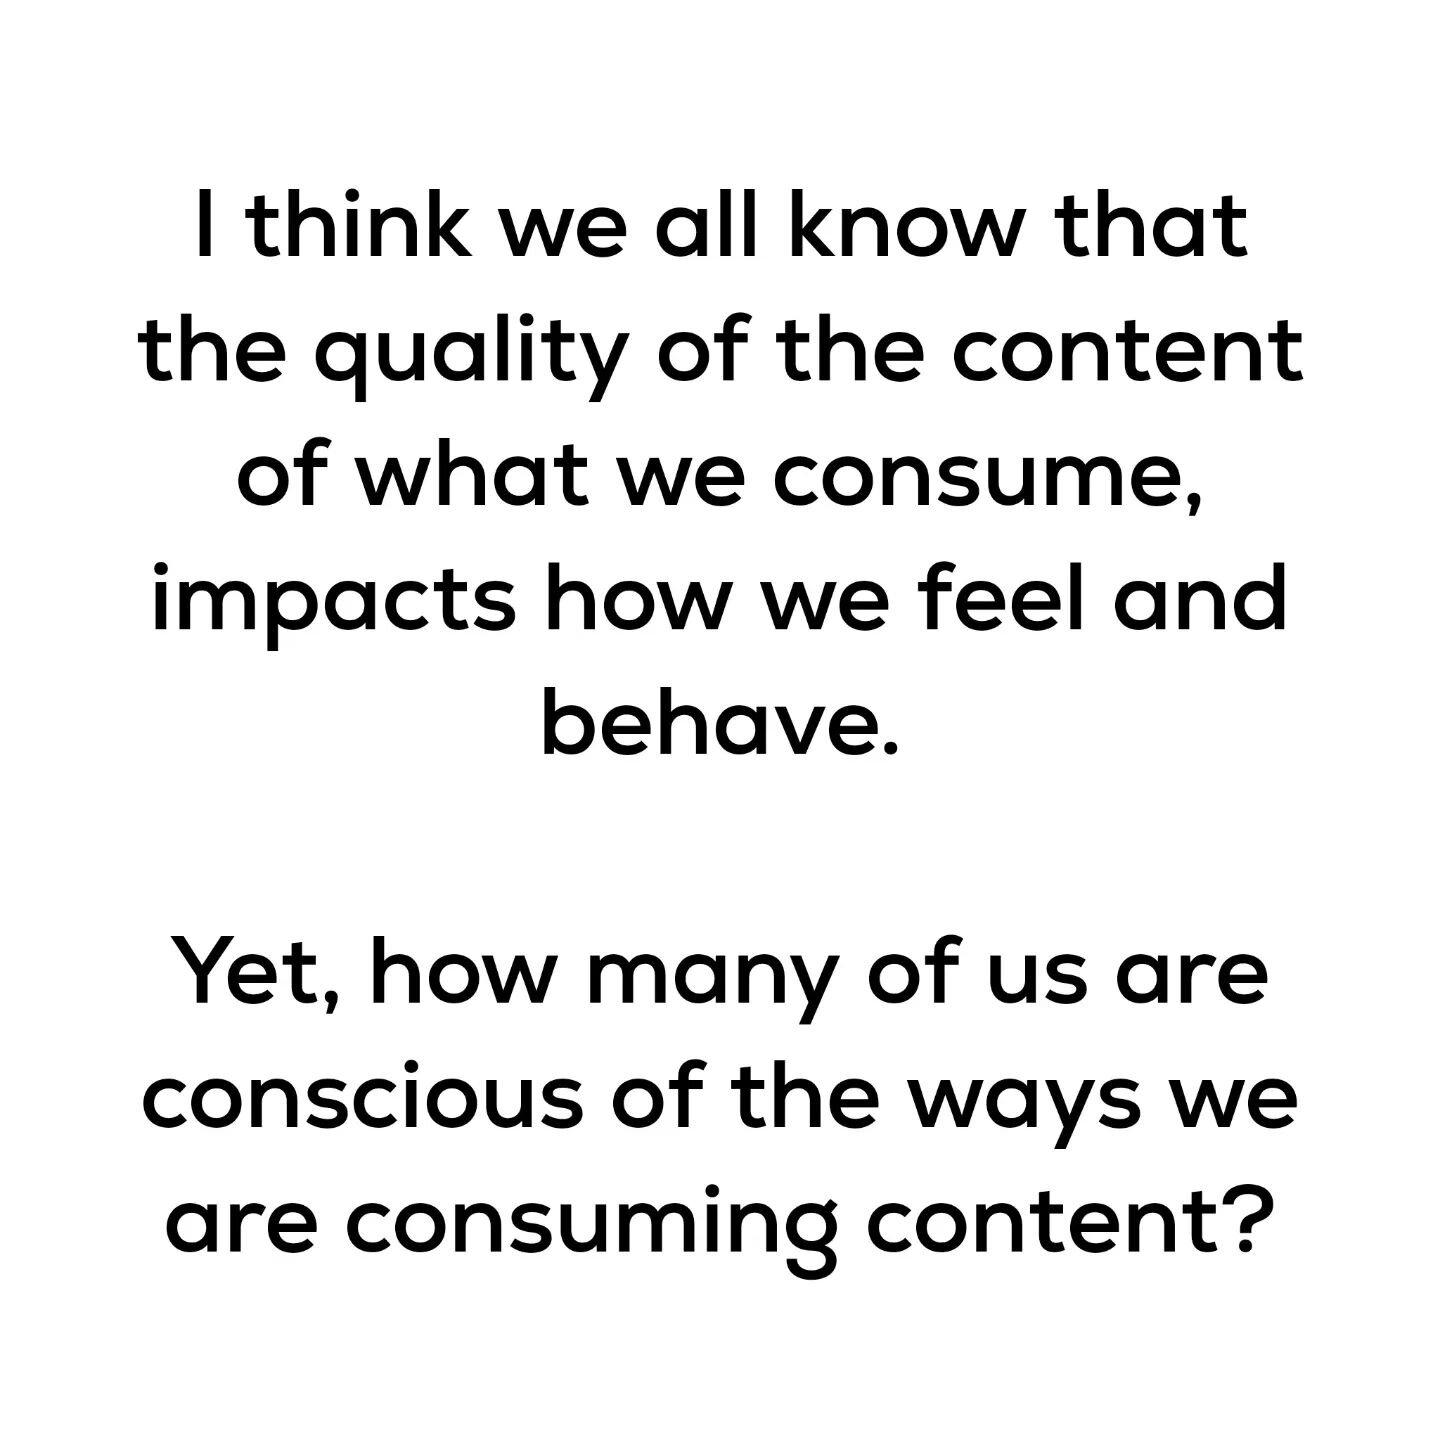 Consumption happens in many ways, not solely through the food we put in our mouth. 

We consume through the music we listen to, the things we watch, the thoughts we believe in, the environments of which we spend time in, the things we drink, what we 